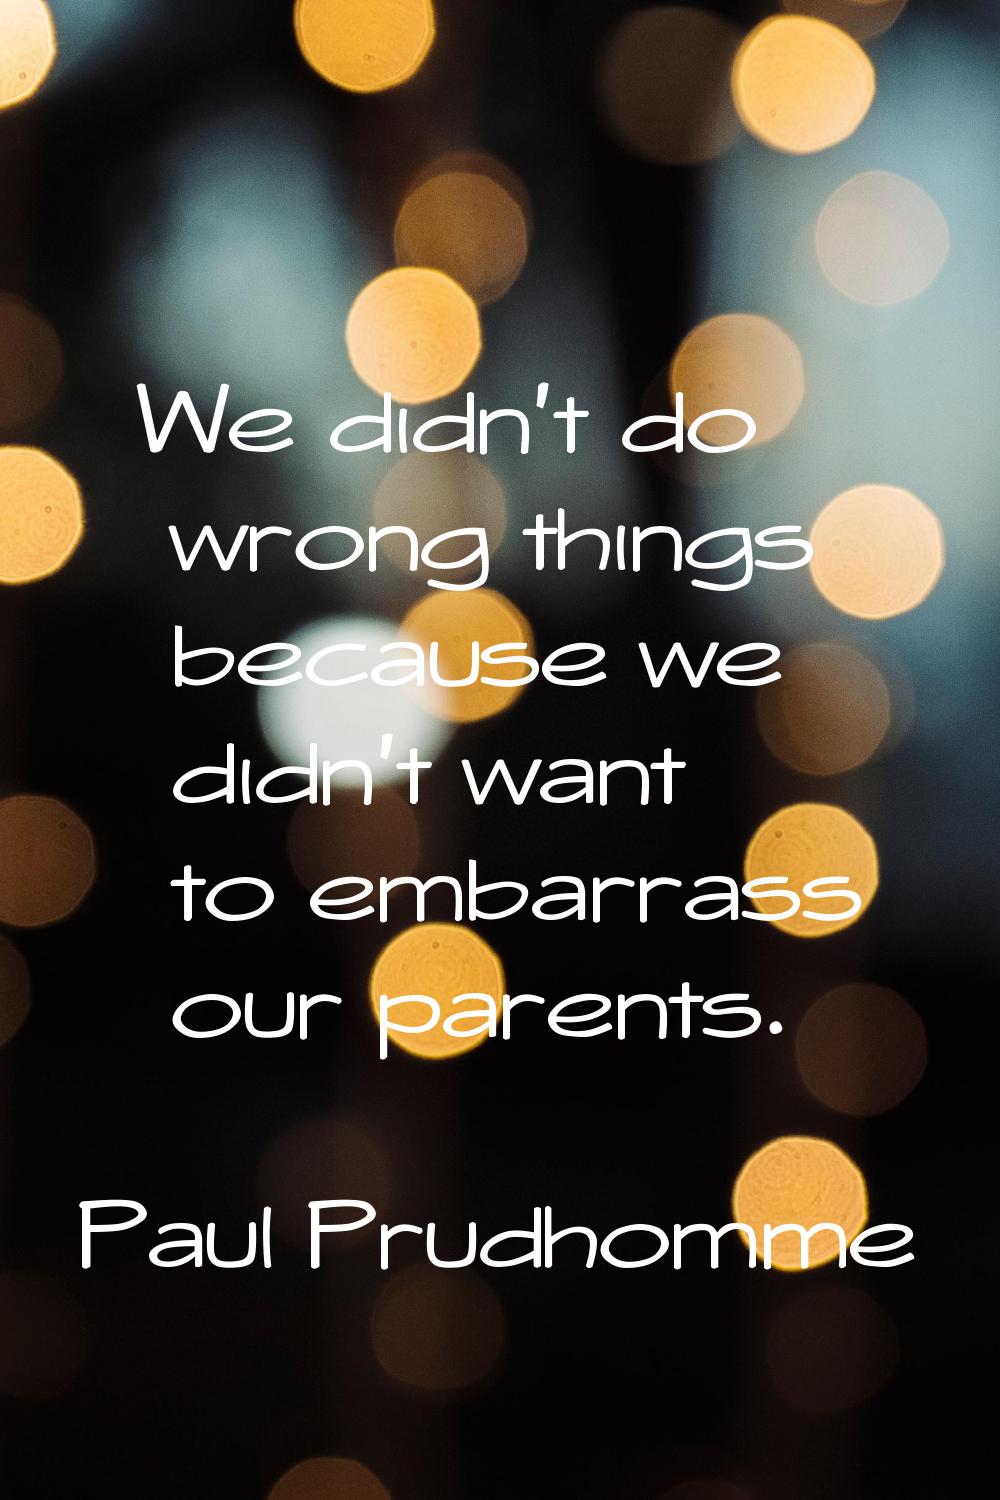 We didn't do wrong things because we didn't want to embarrass our parents.